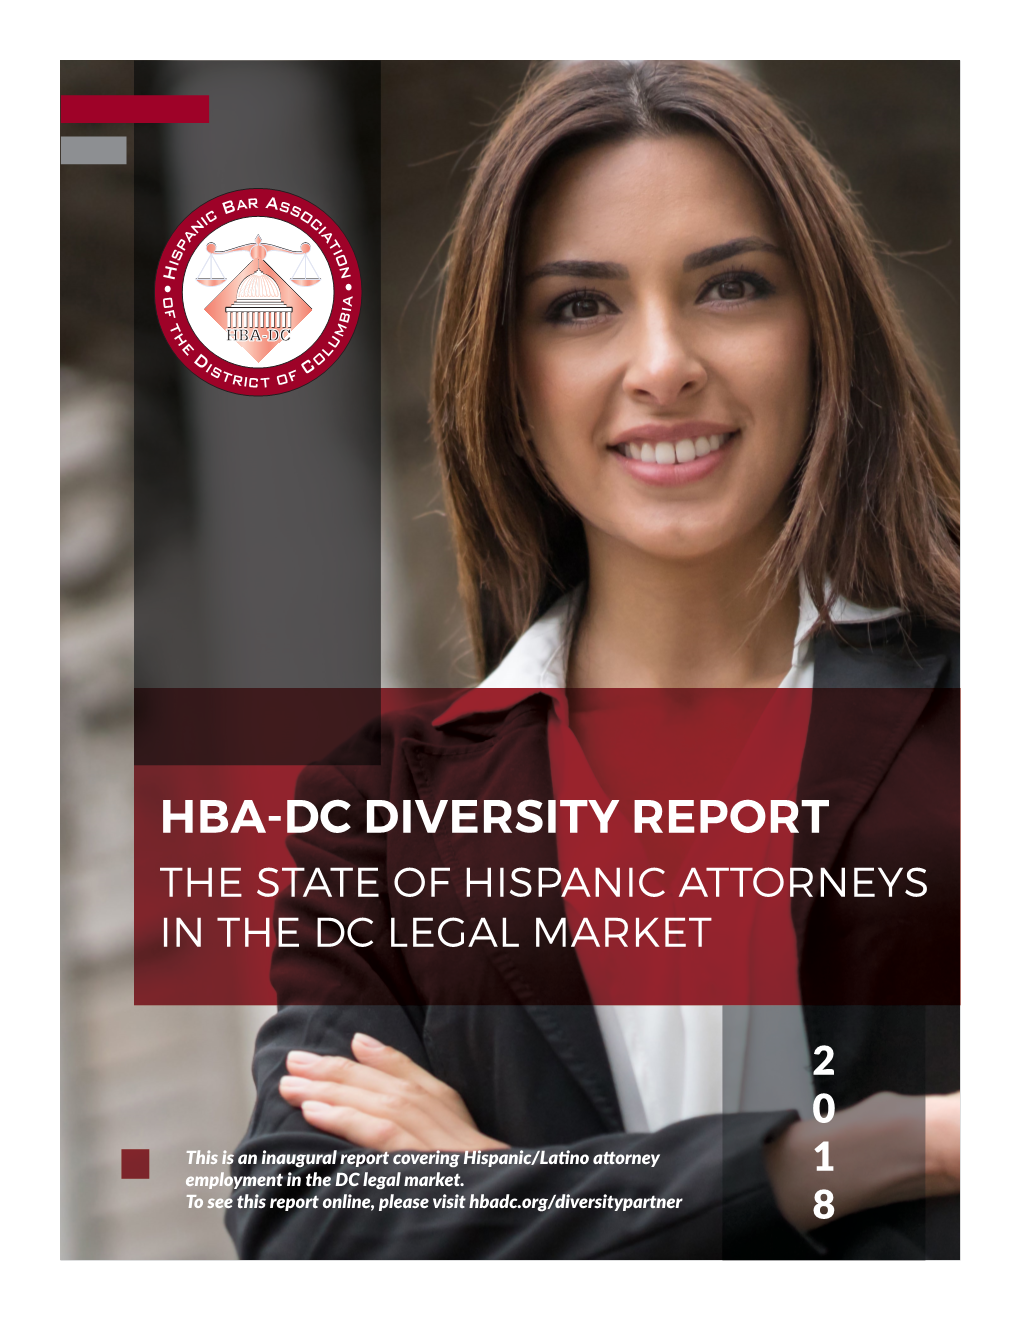 2018 HBA-DC DIVERSITY REPORT 2018 PB As the Most Diverse, Most Creative, and Biggest Democratic Firm in Washington, We Don't Just Talk the Talk